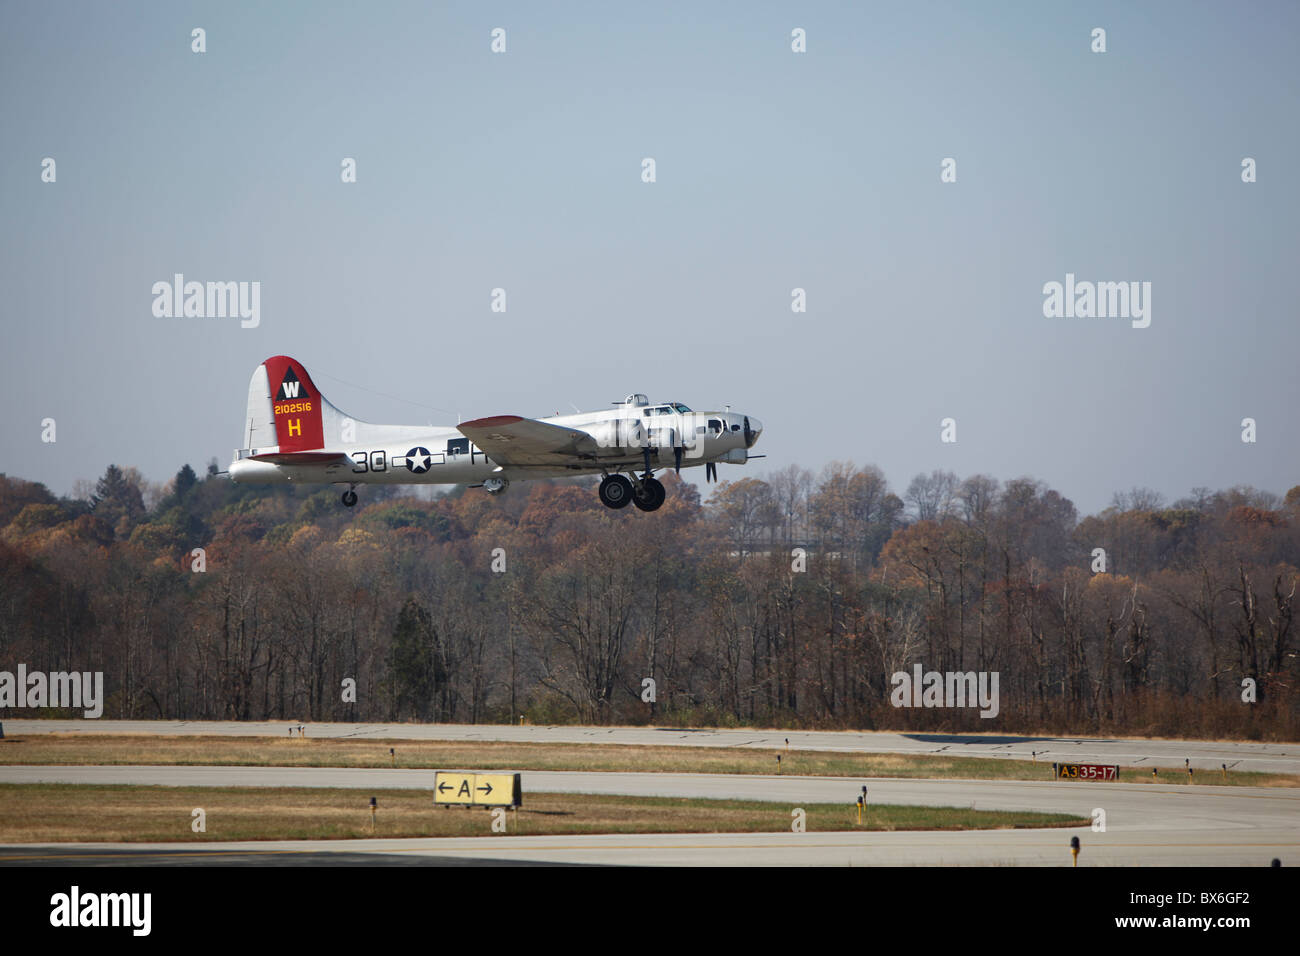 Aluminum Overcast restored B-17 Flying Fortress WWII era bomber flight taking flight off air runway army air corps airport monroe county indiana bloomington Stock Photo